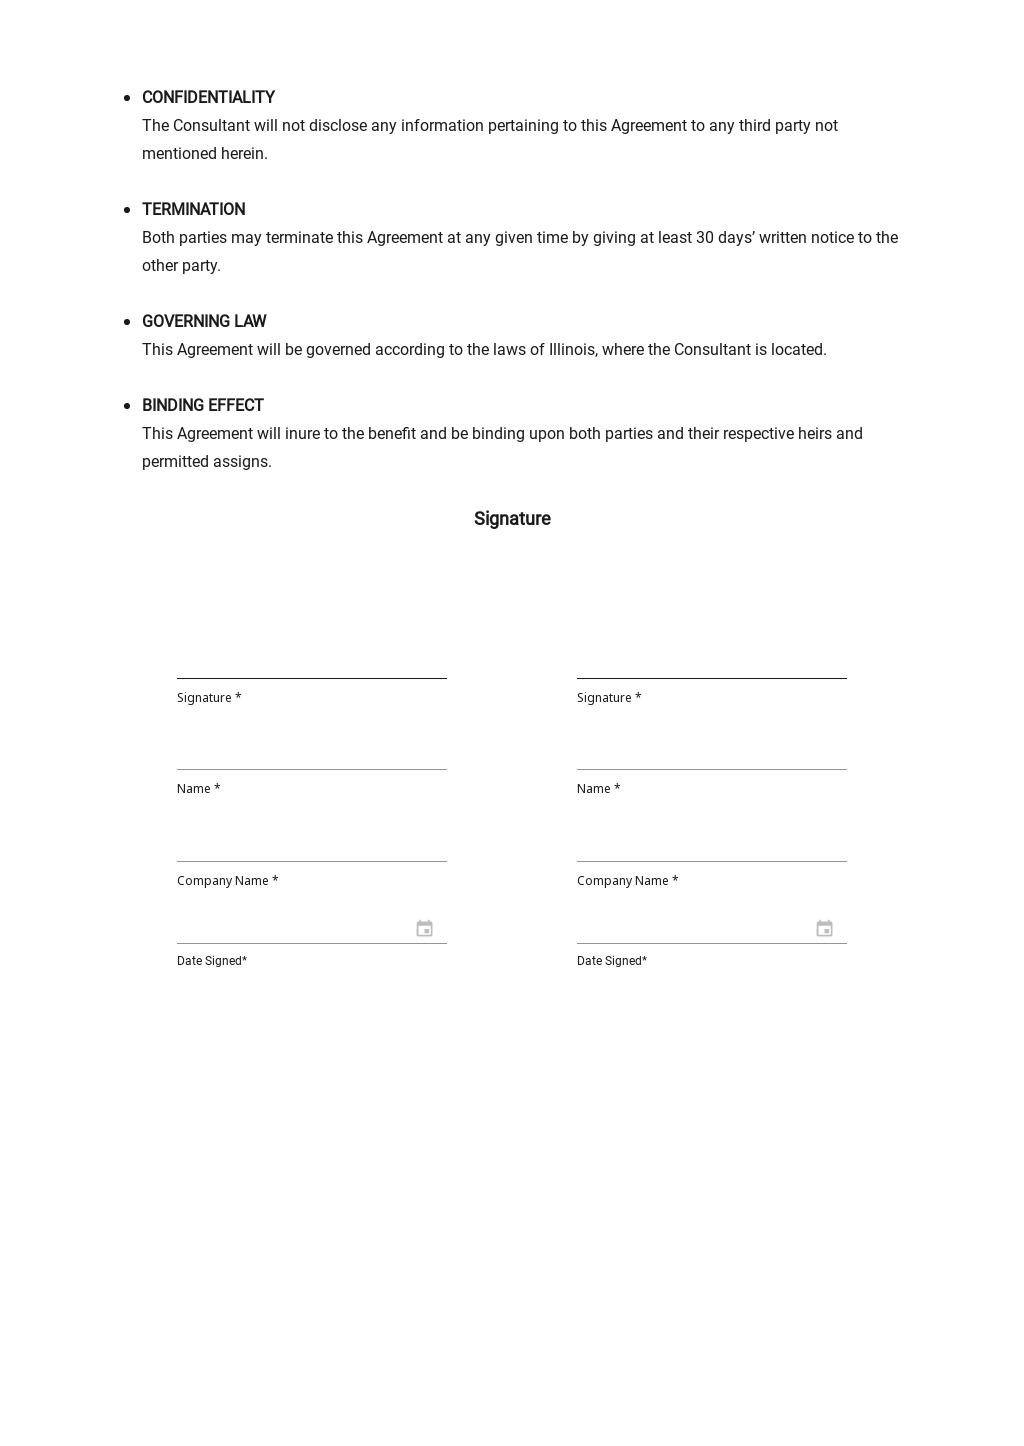 Advertising and Marketing Agreement Template 2.jpe